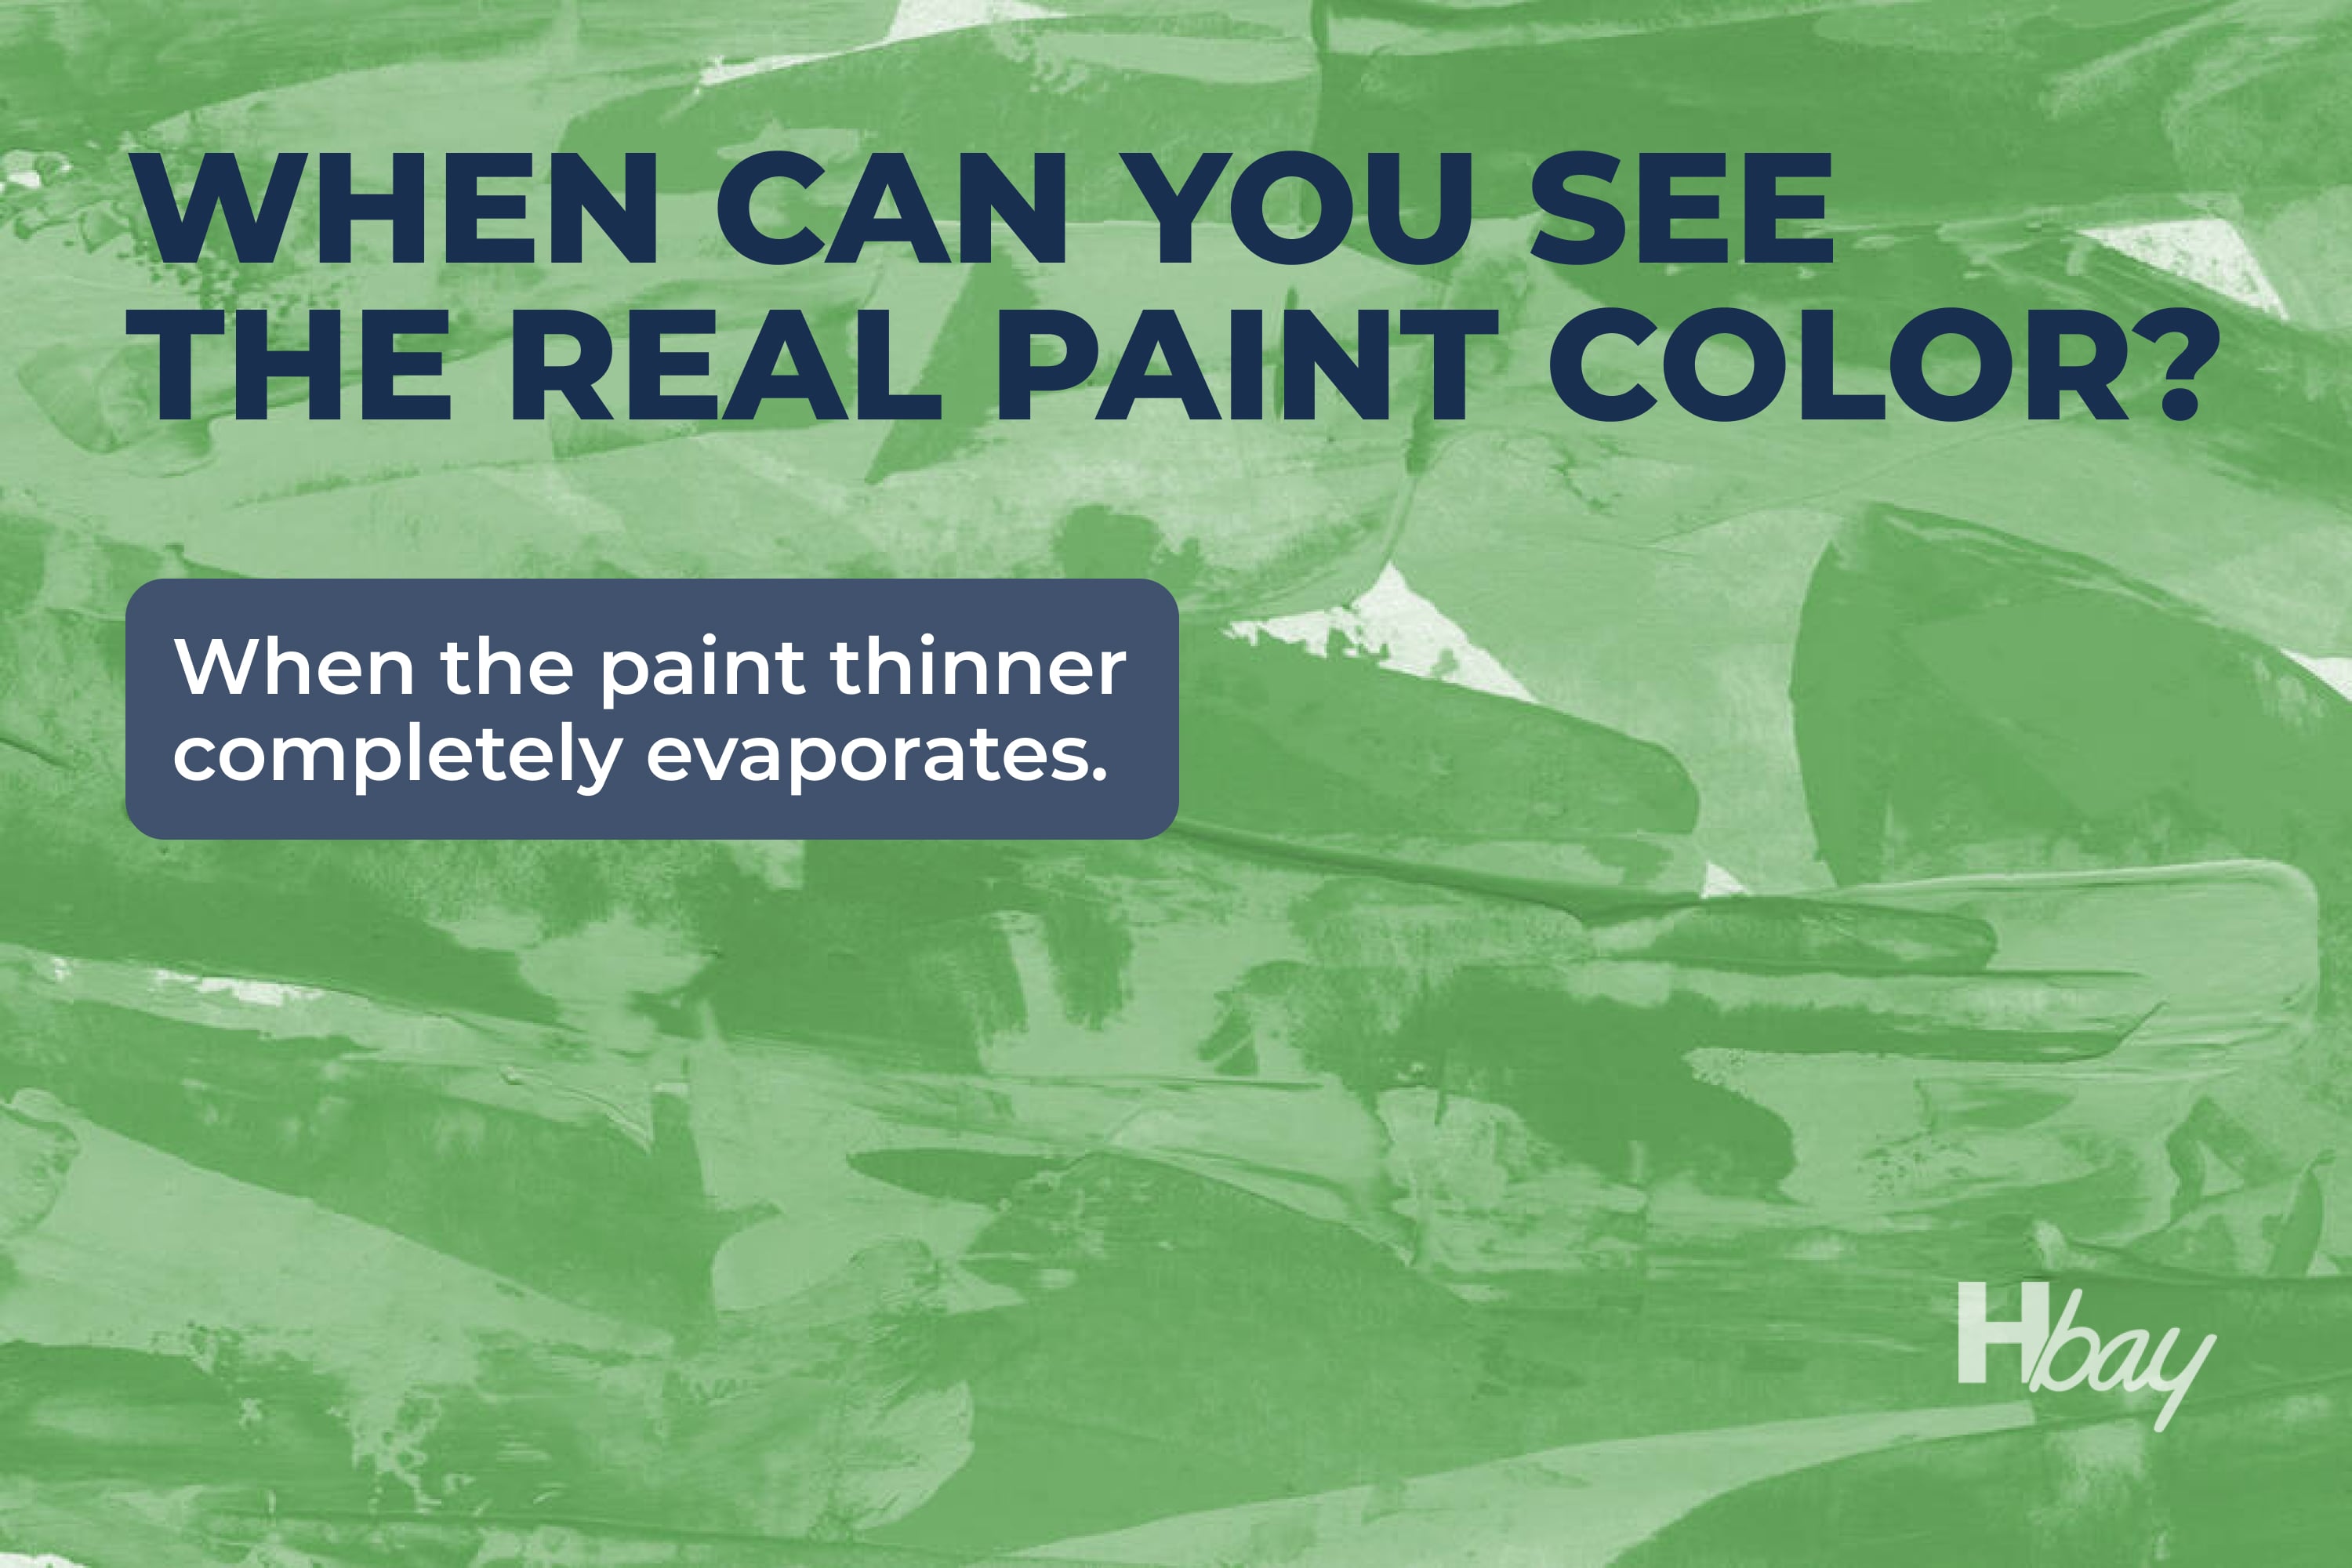 When can you see the real paint color